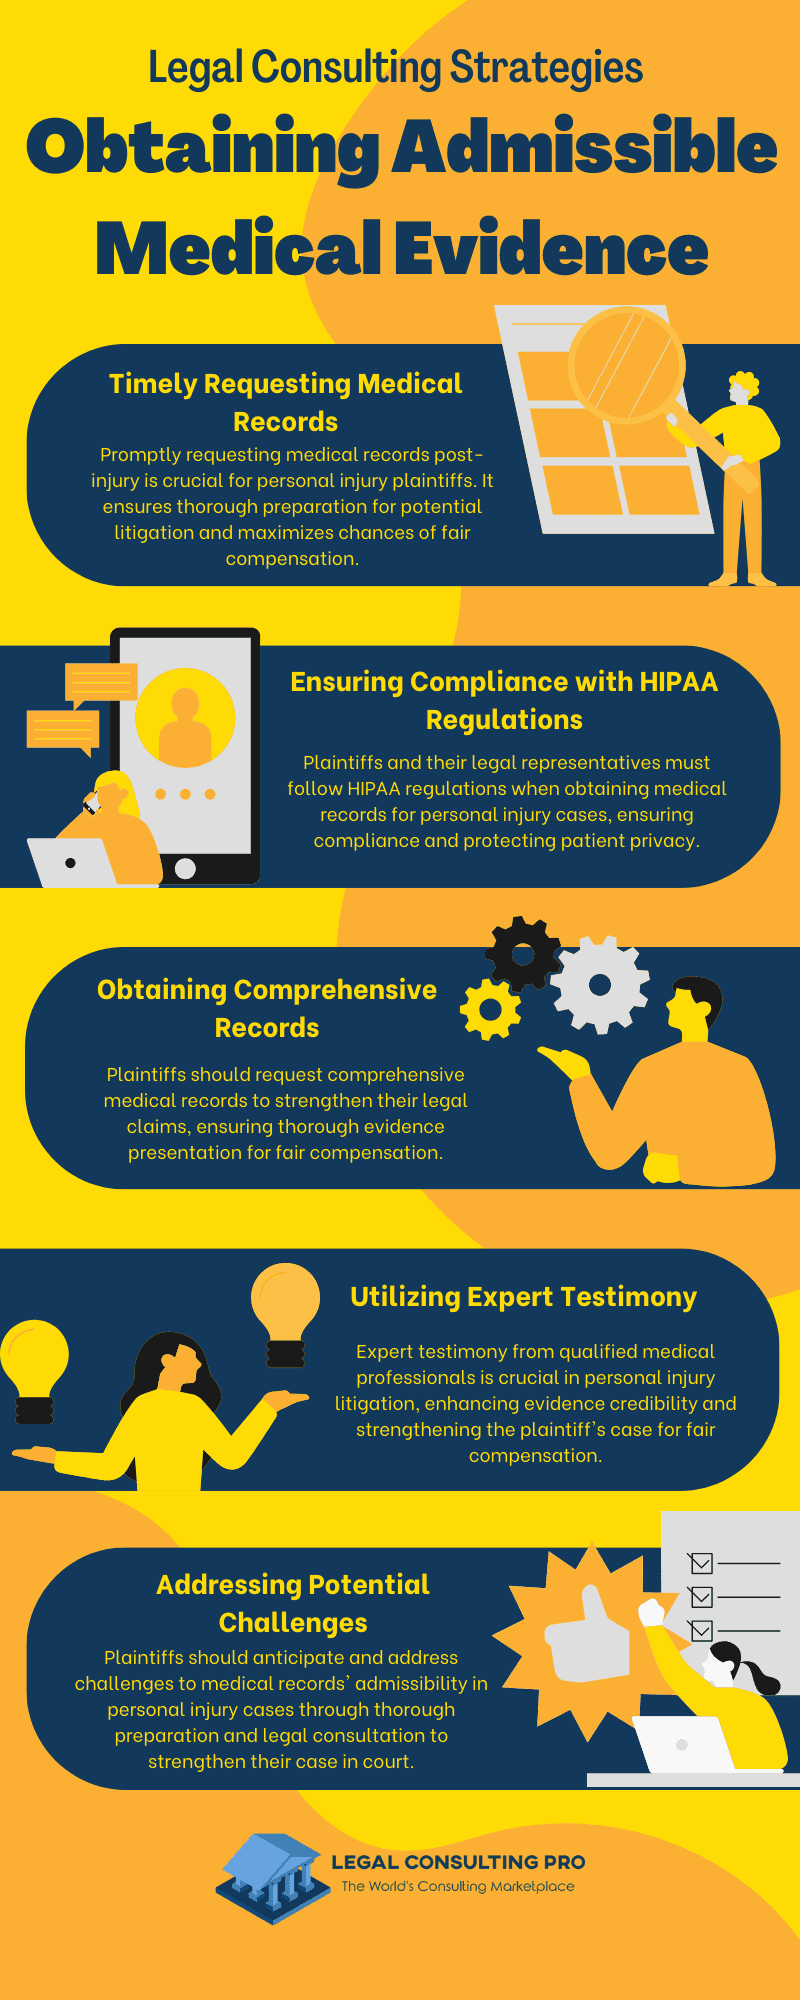 Legal Consulting Strategies for Obtaining Admissible Medical Evidence Infographic